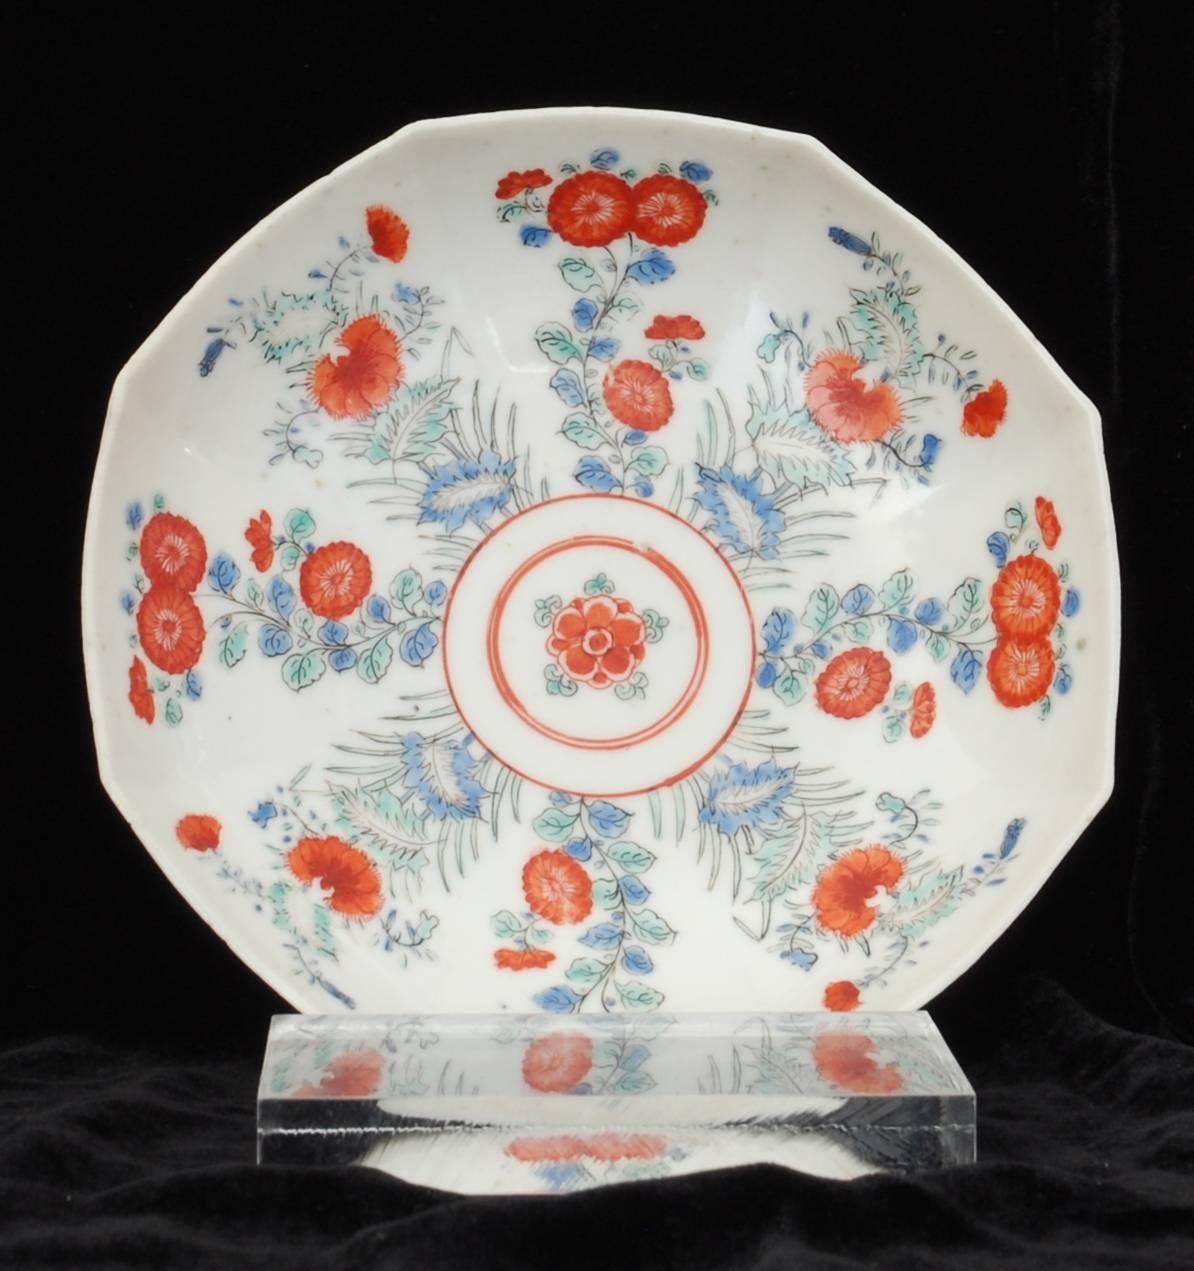 A large octagonal tea-bowl, decorated in the Japanese style. 

“The decoration is effective and pleasing, but does not seem to have been very frequently employed” – McKenna.

Provenance: Frank Wheeldon collection.